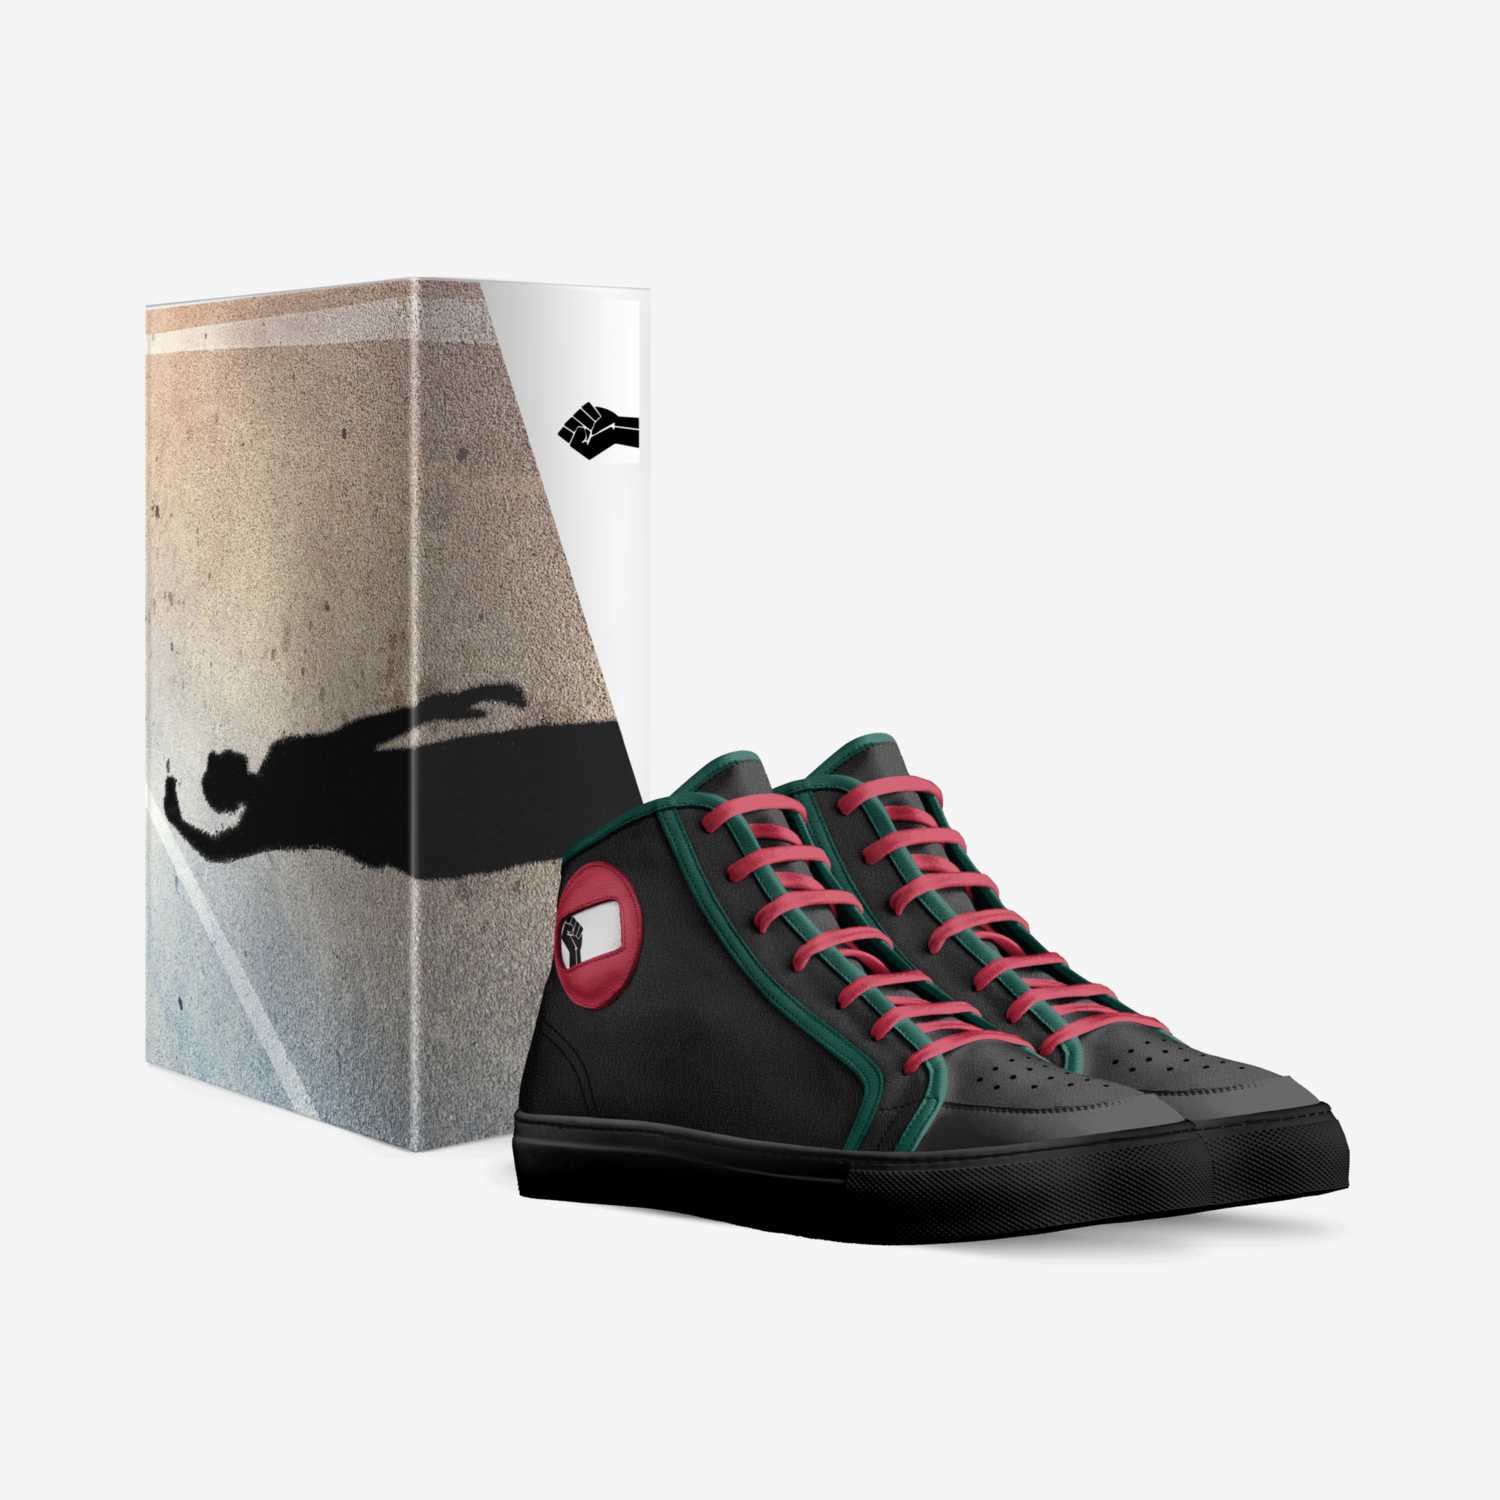 Freedom Fighter 2 custom made in Italy shoes by Jay Rene | Box view